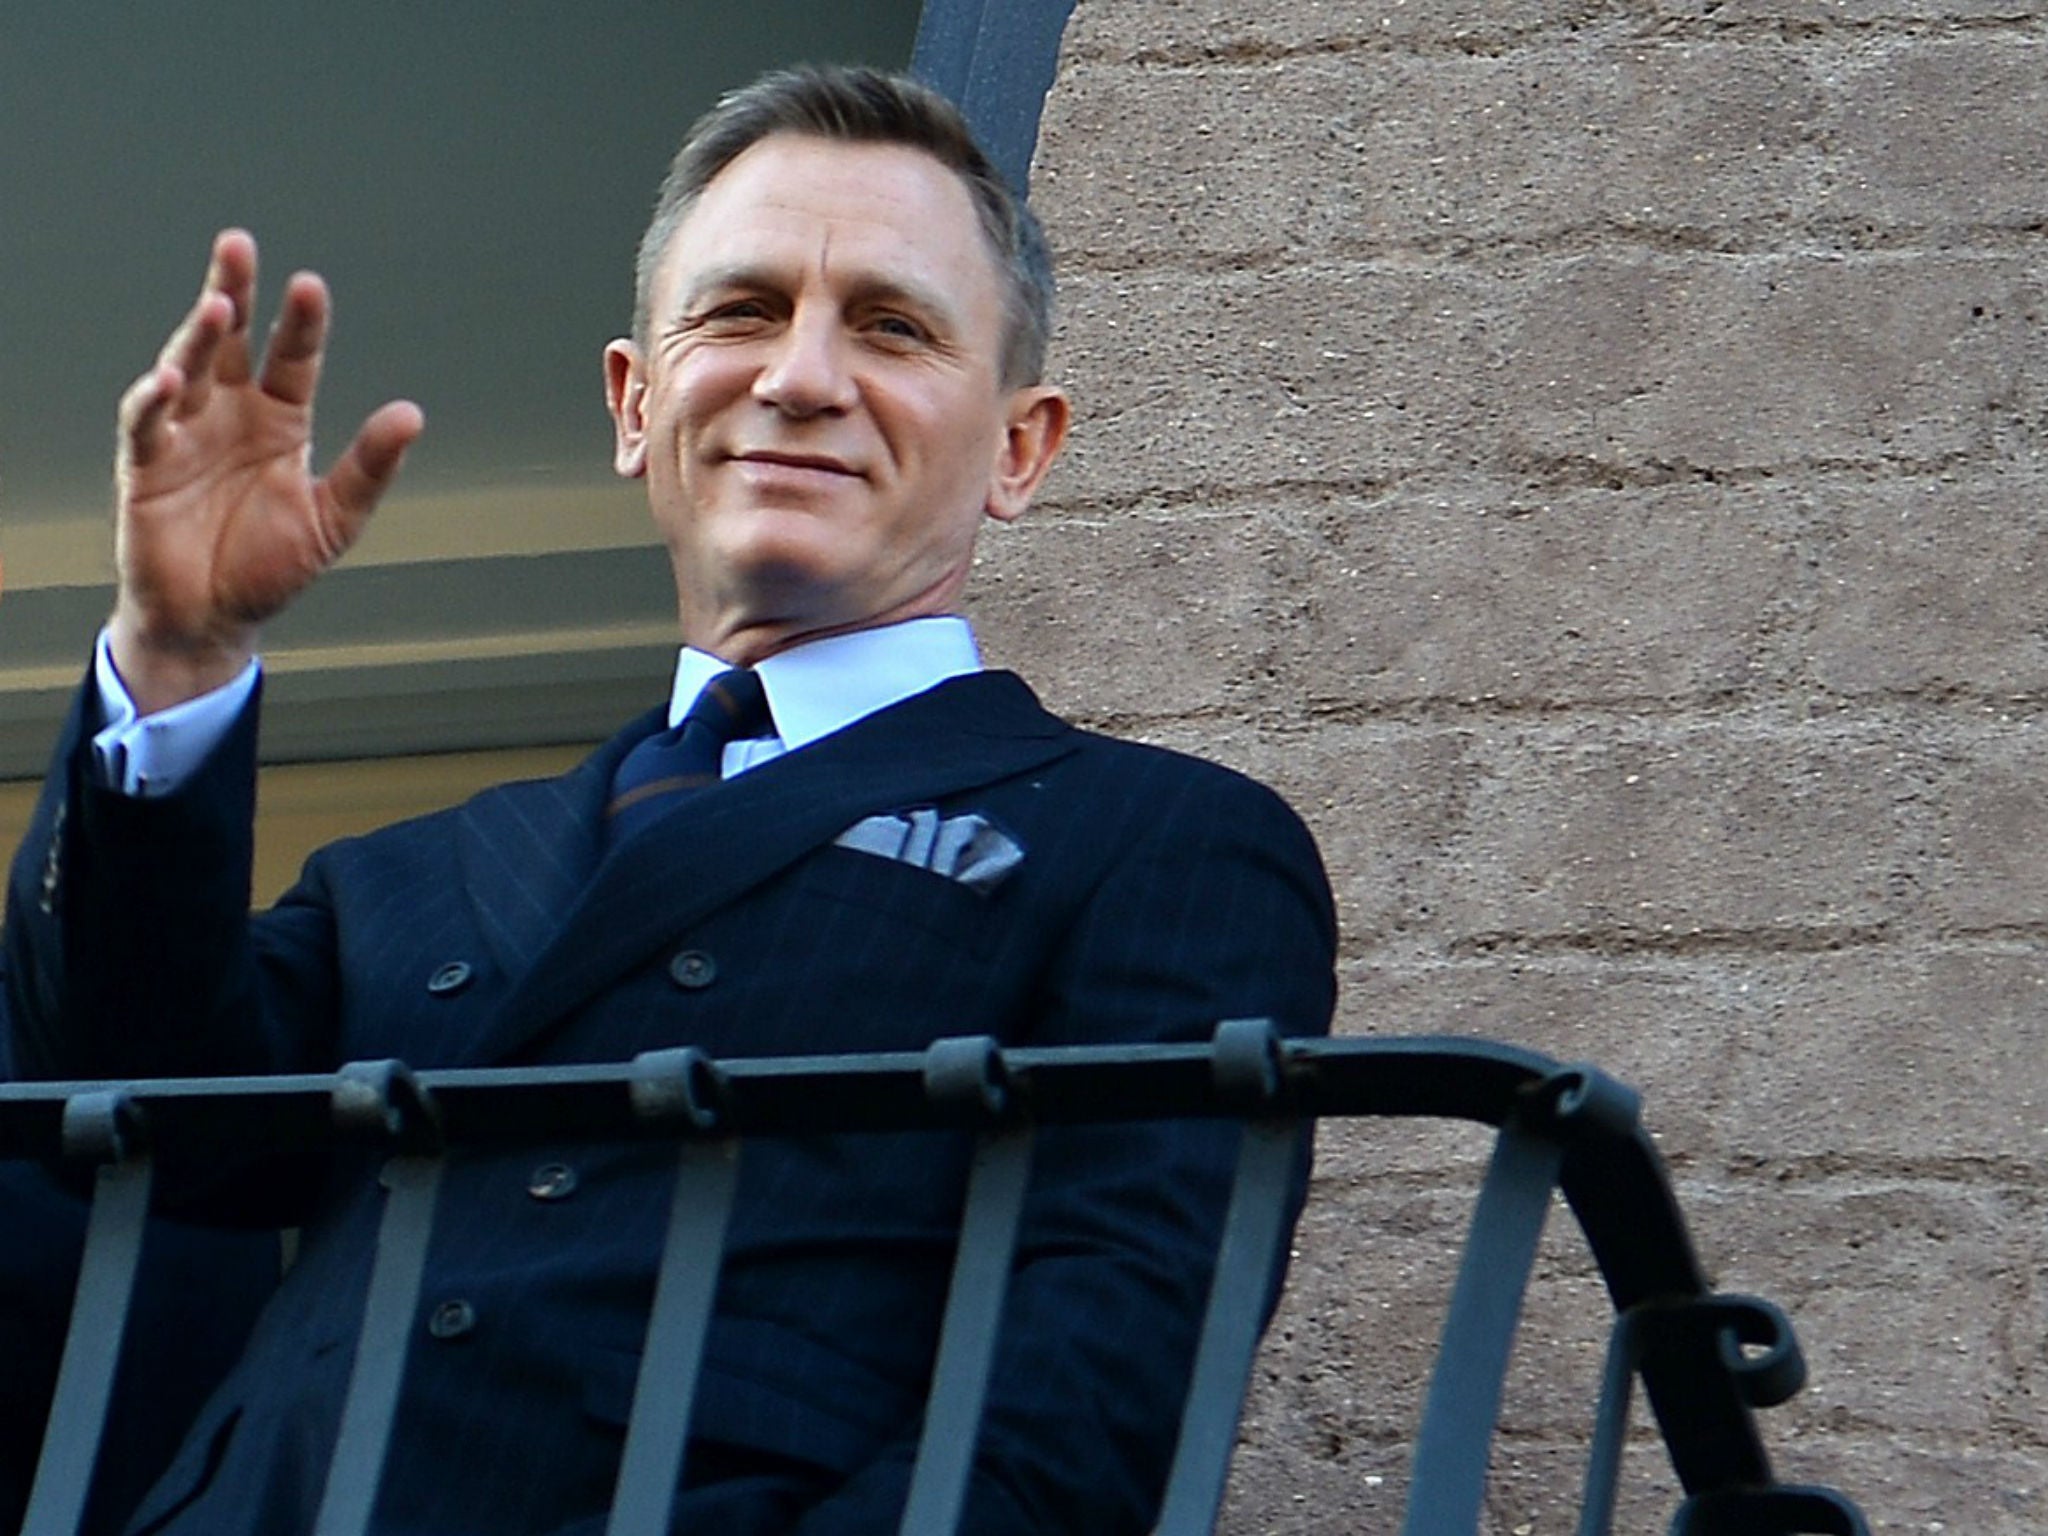 Daniel Craig is staying cagey about whether or not he plans to play James Bond again